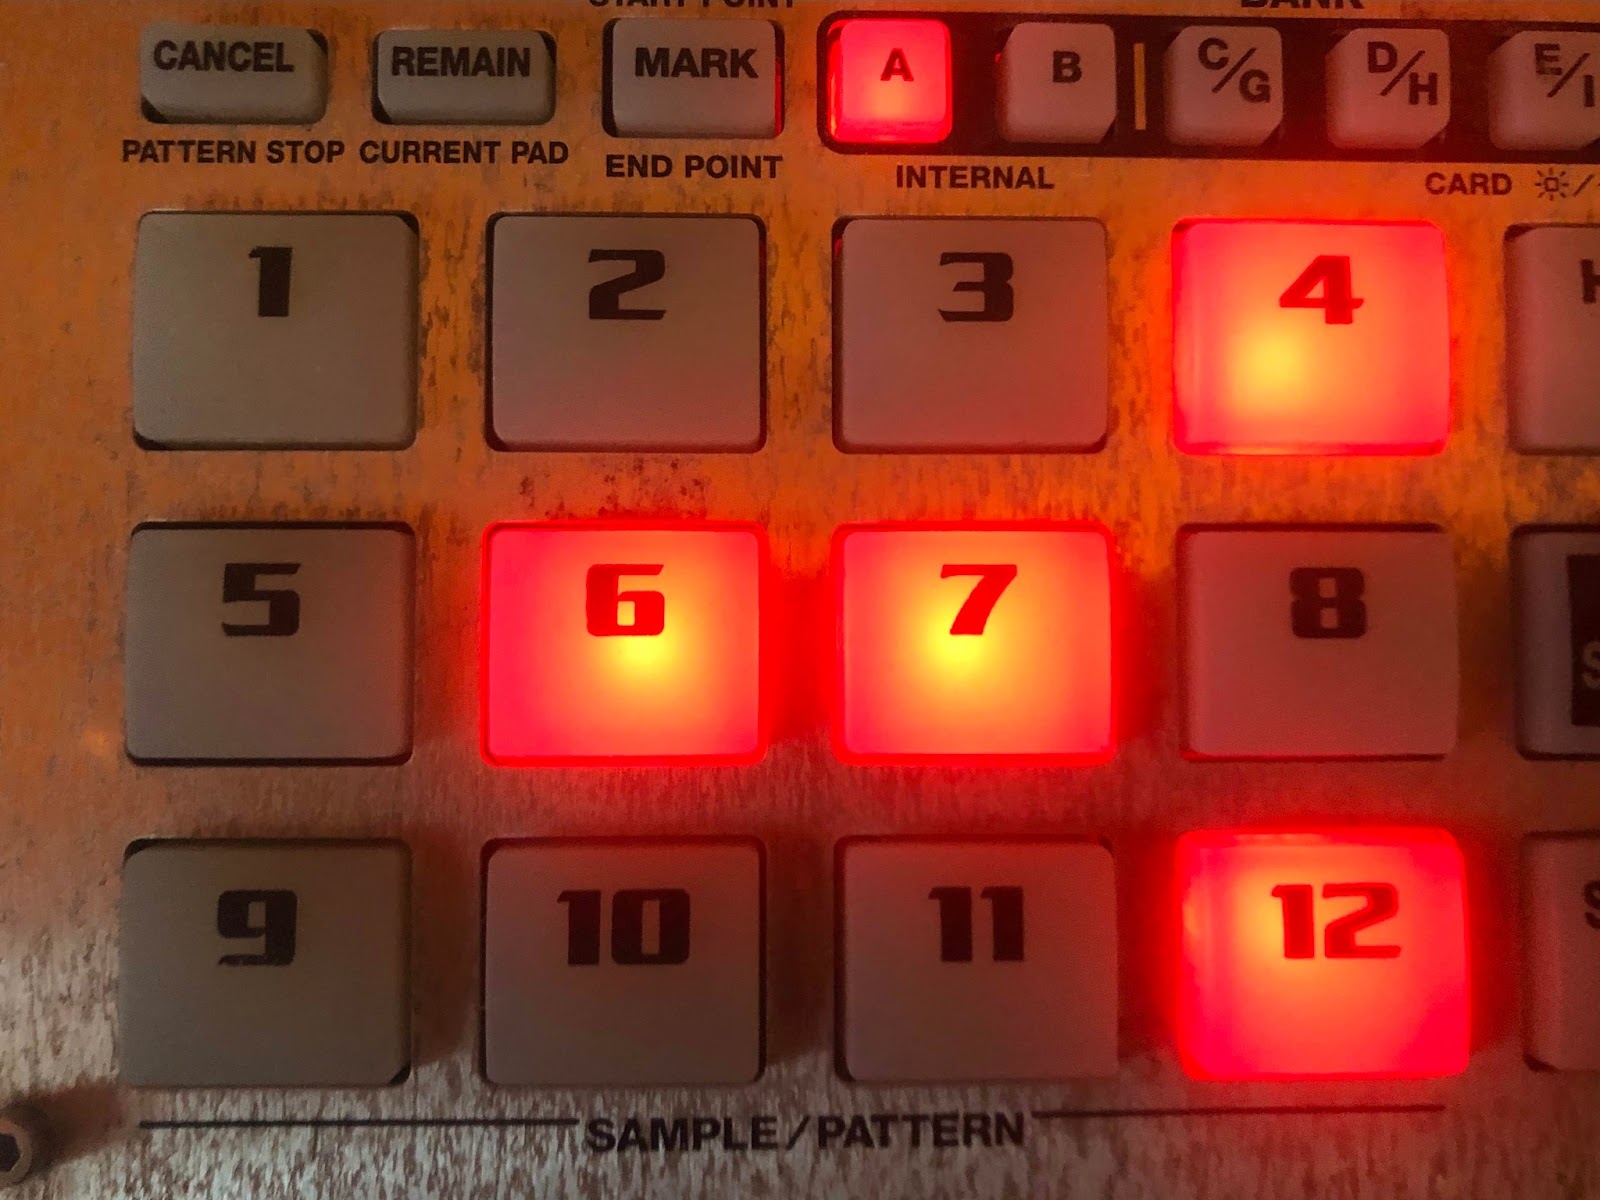 What is so great about the SP-404?